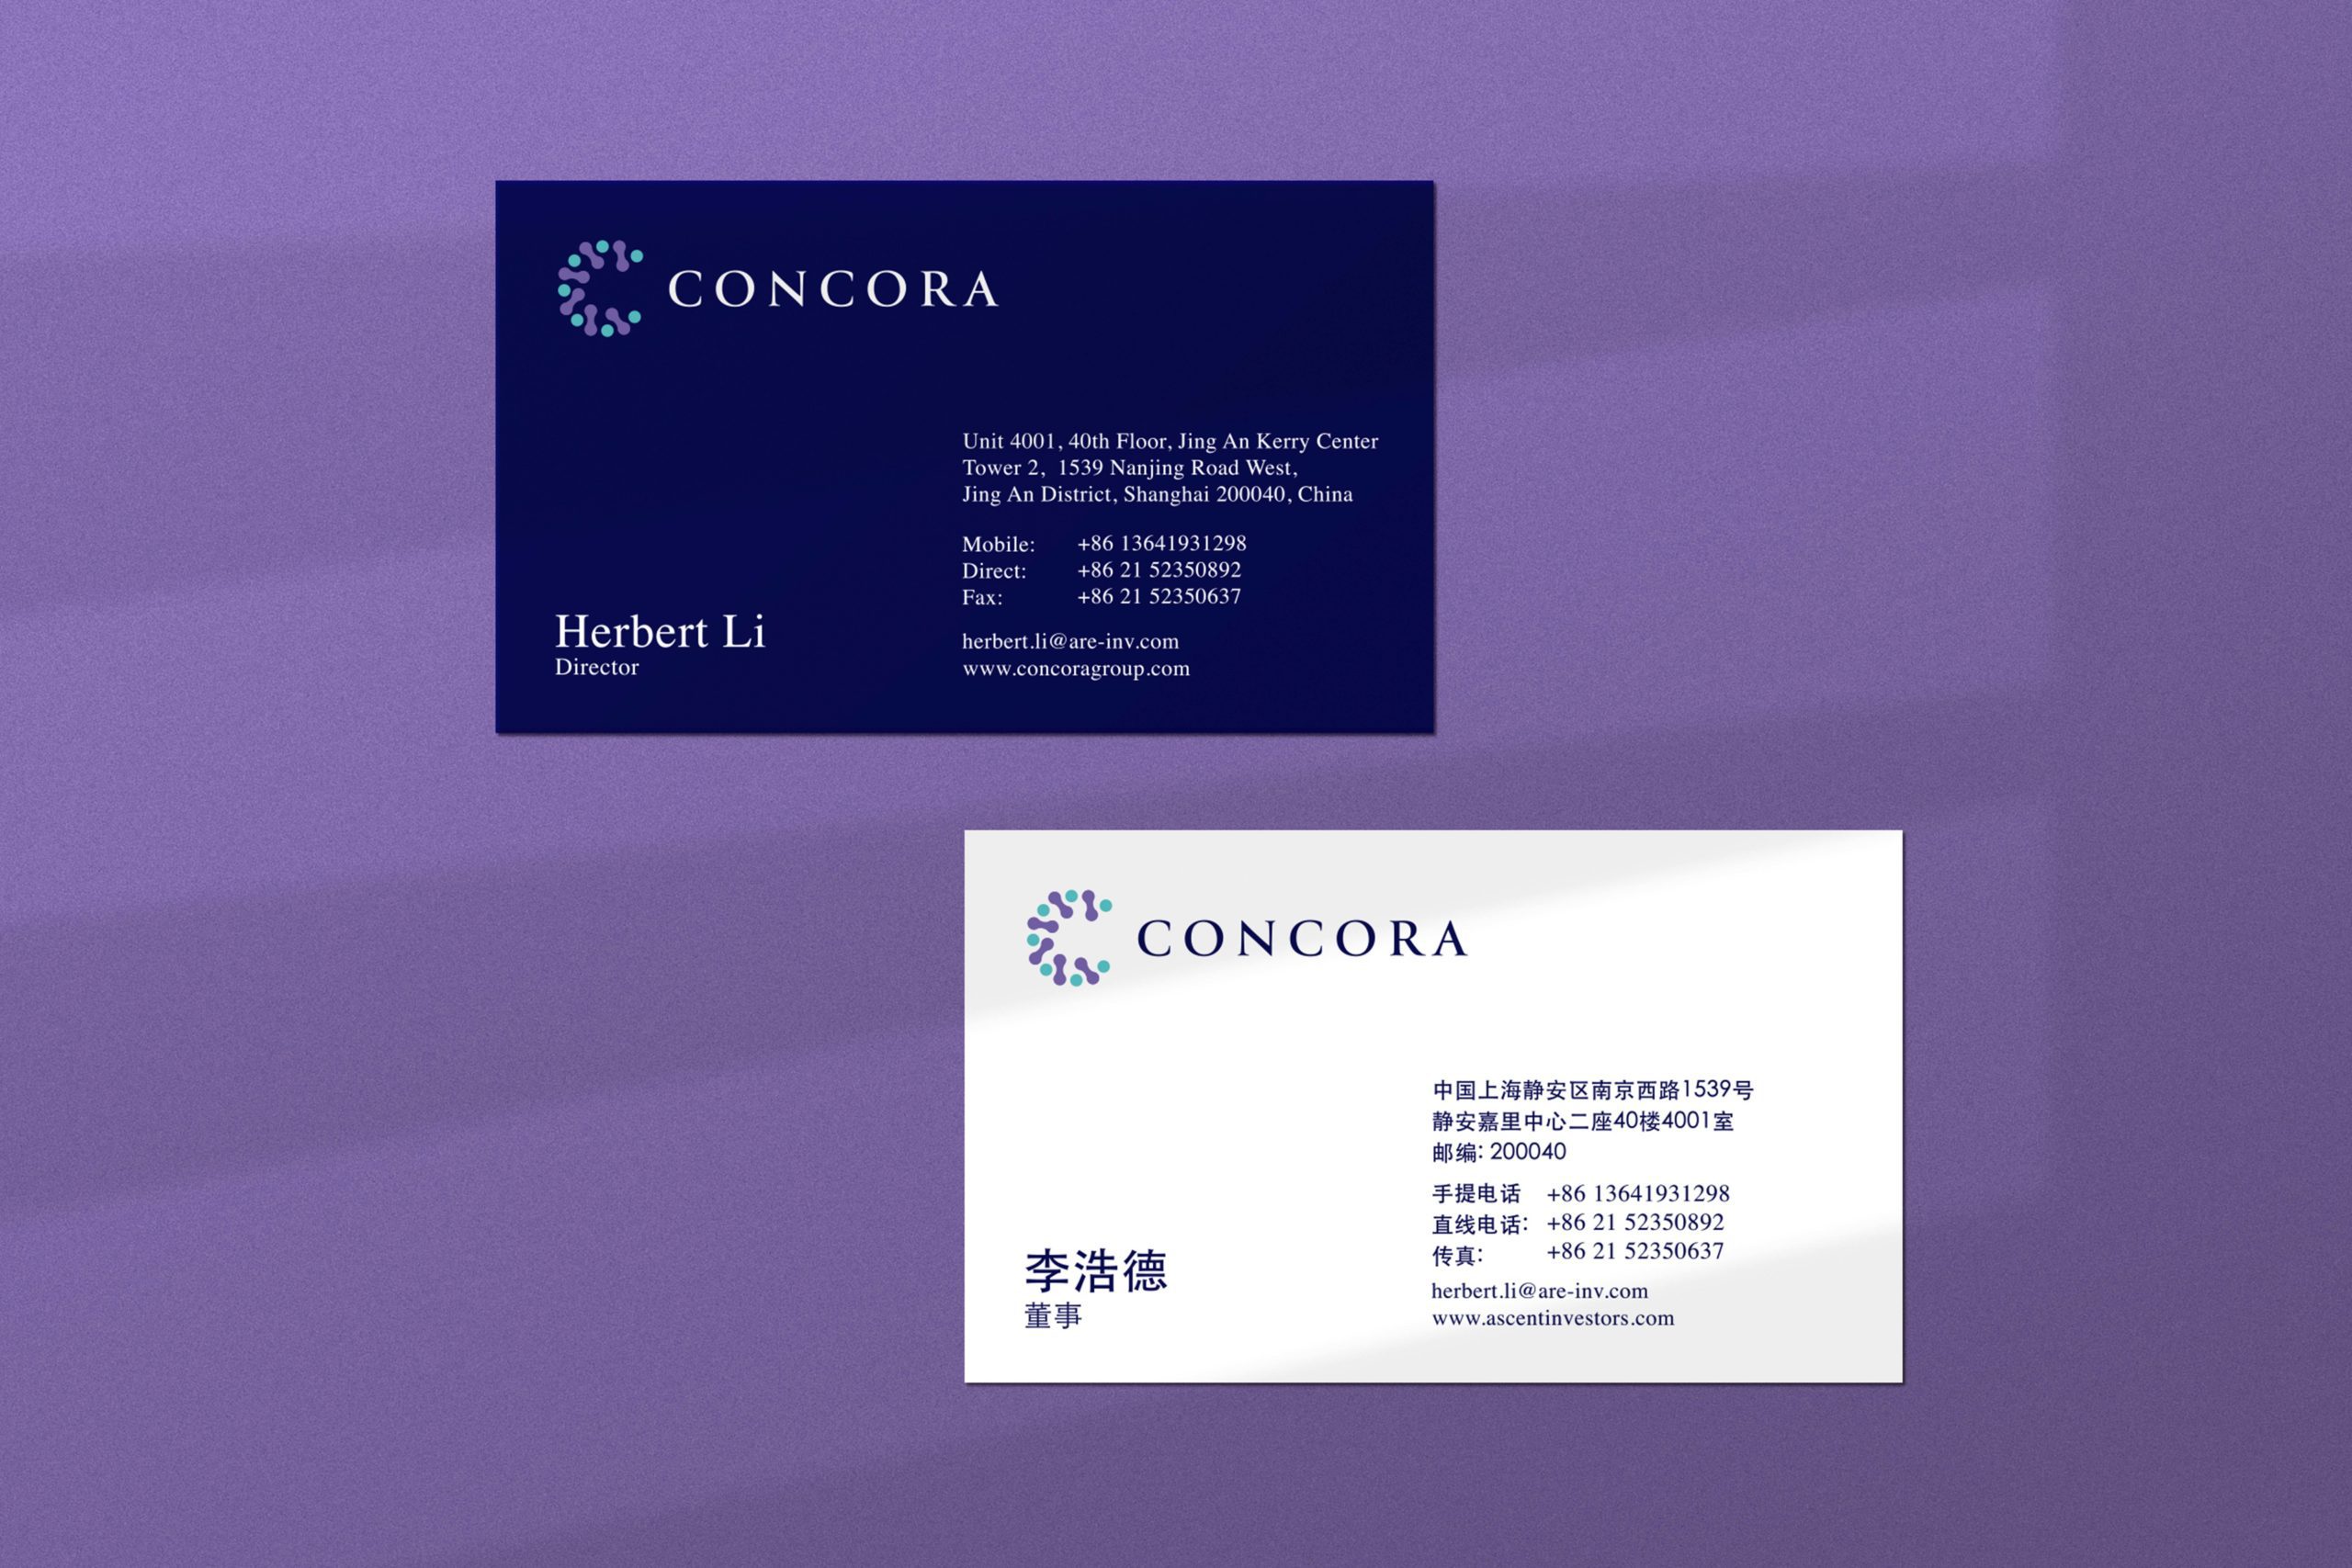 Concora Branding Project Business Cards Design on purple background